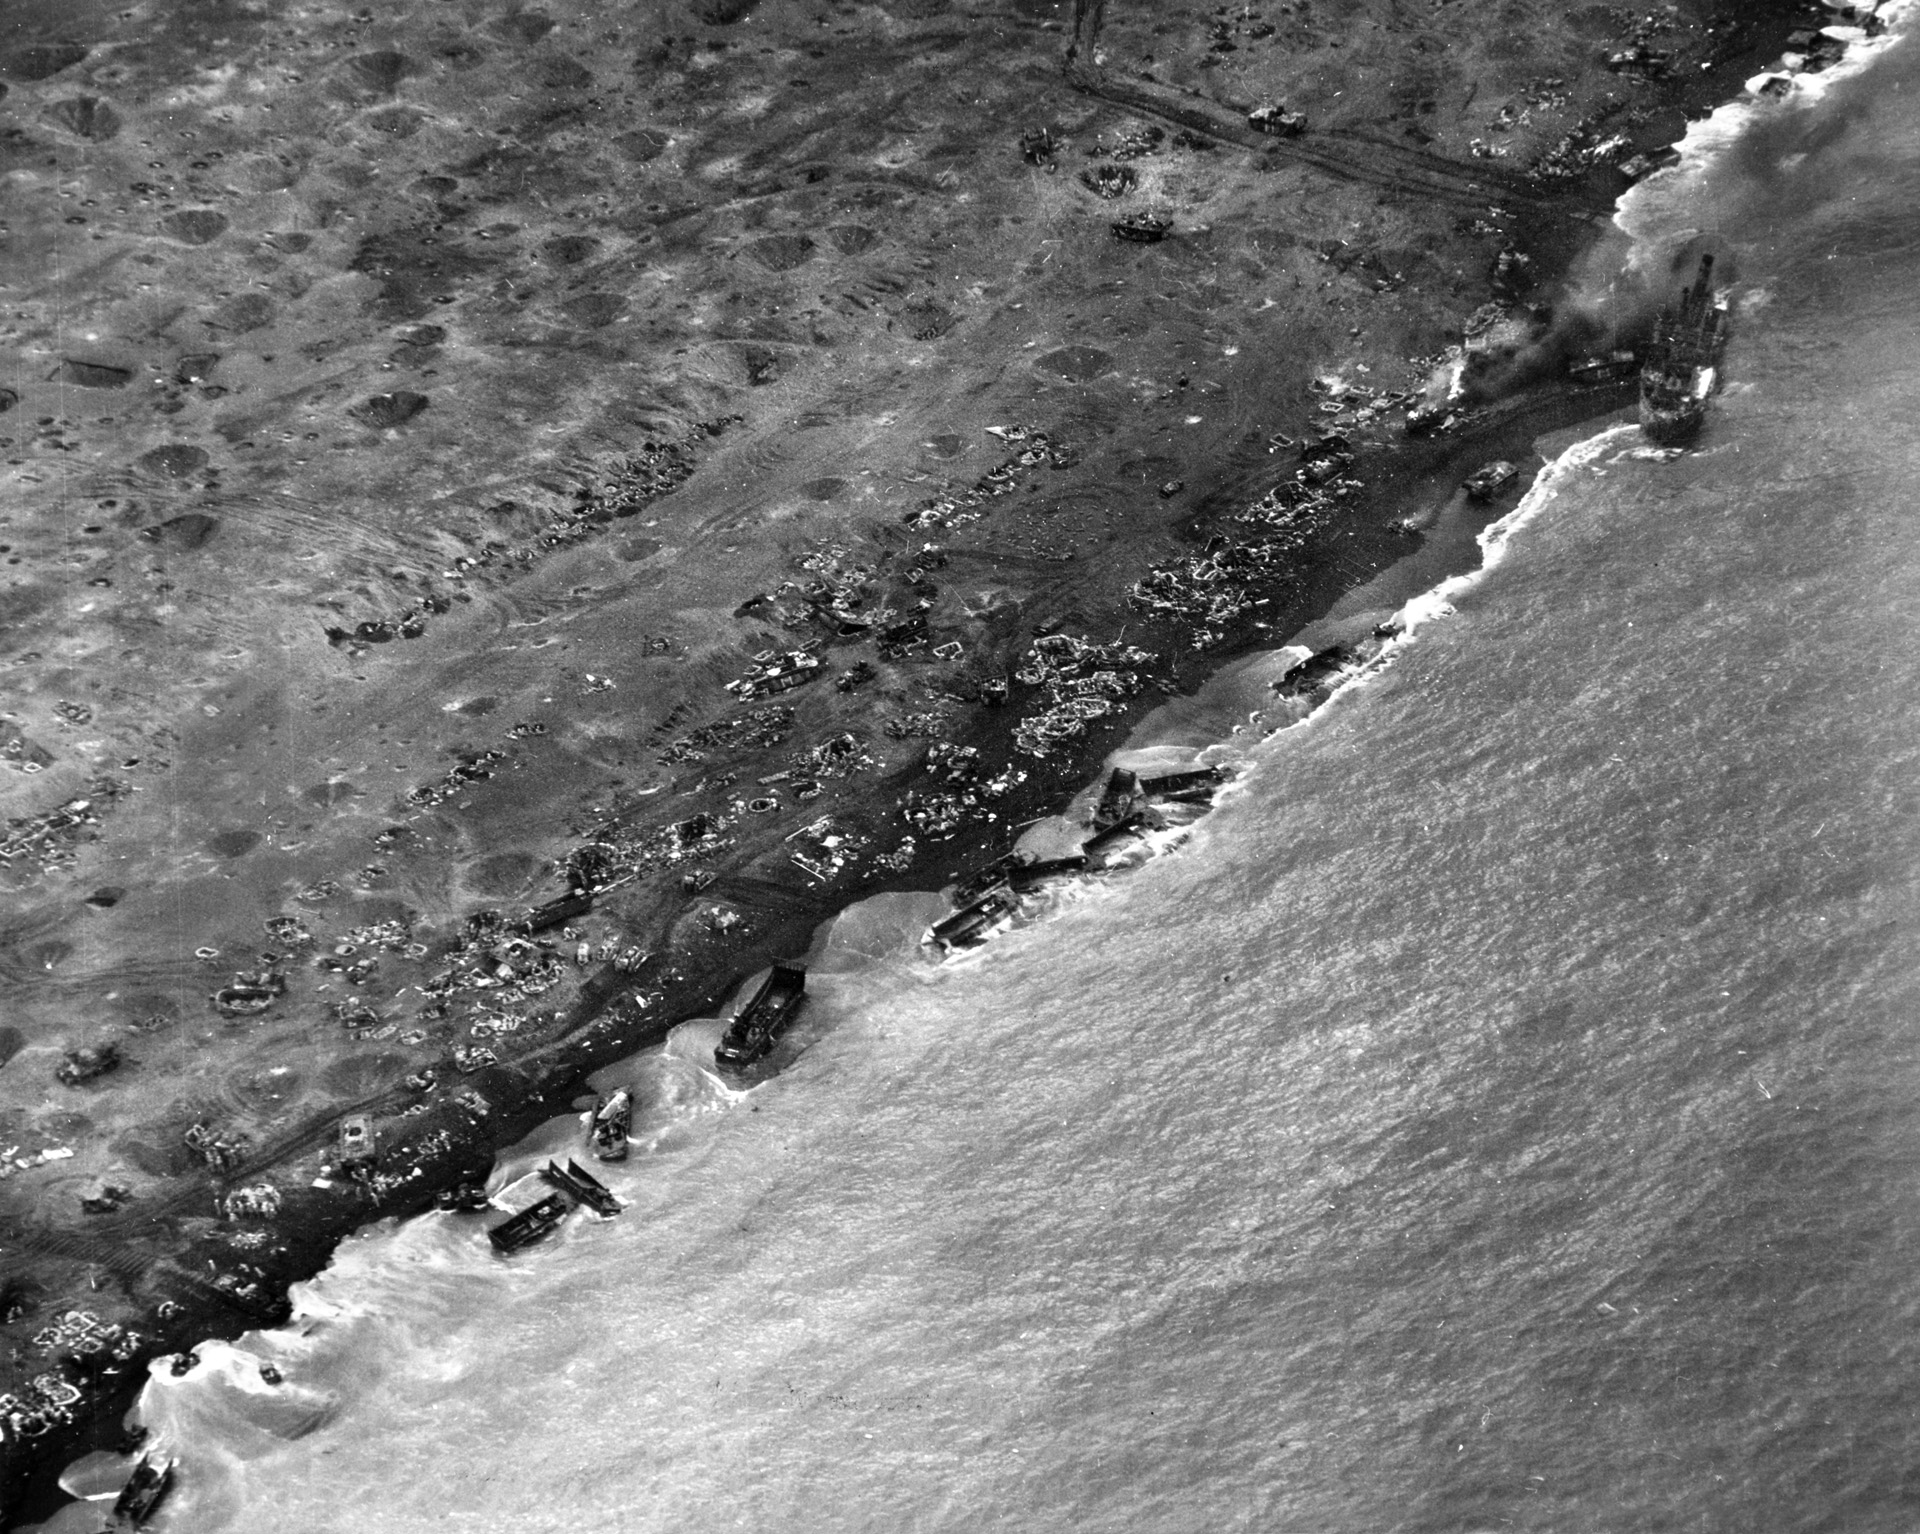 Wrecked landing craft litter the shore line at Iwo Jima, with shell craters and foxholes also visible in this aerial photograph. The Japanese held fire until the beach was crowded with American men and machines, while strong tides and surf also played havoc with the landings. 